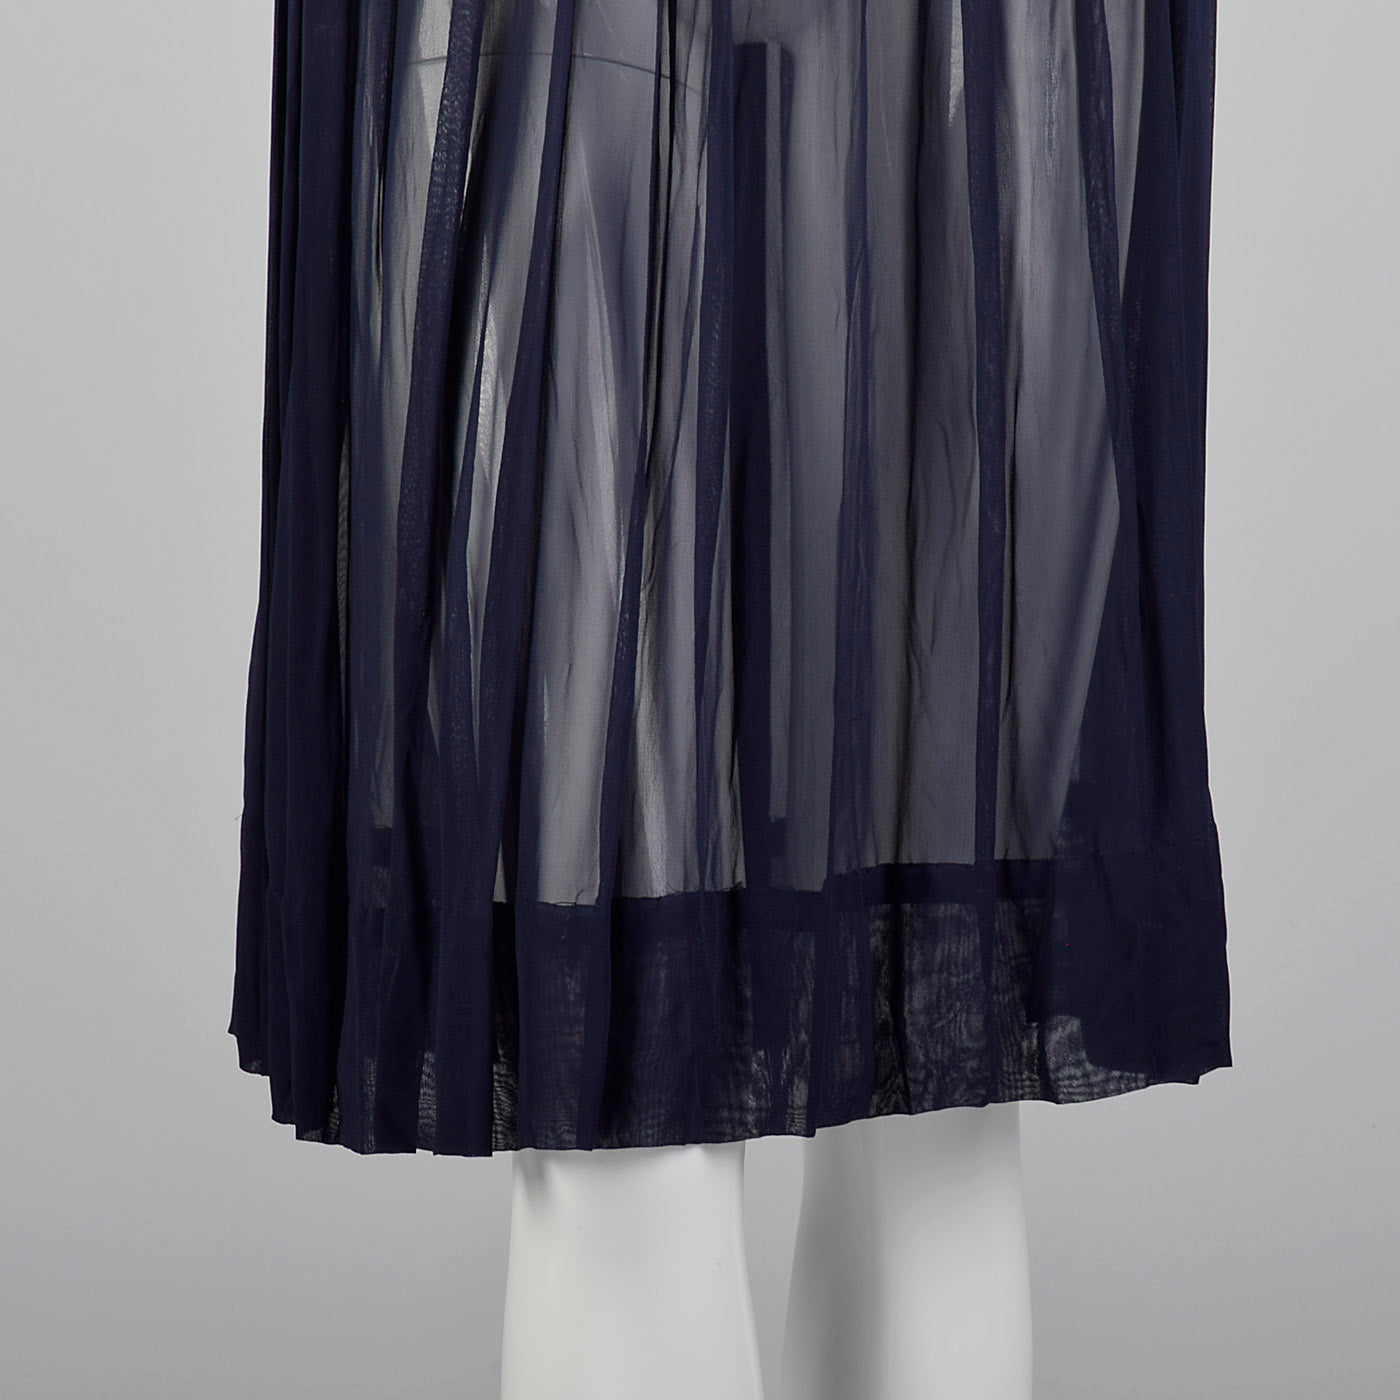 1940s Sheer Navy Blue Dress with Pleated Front